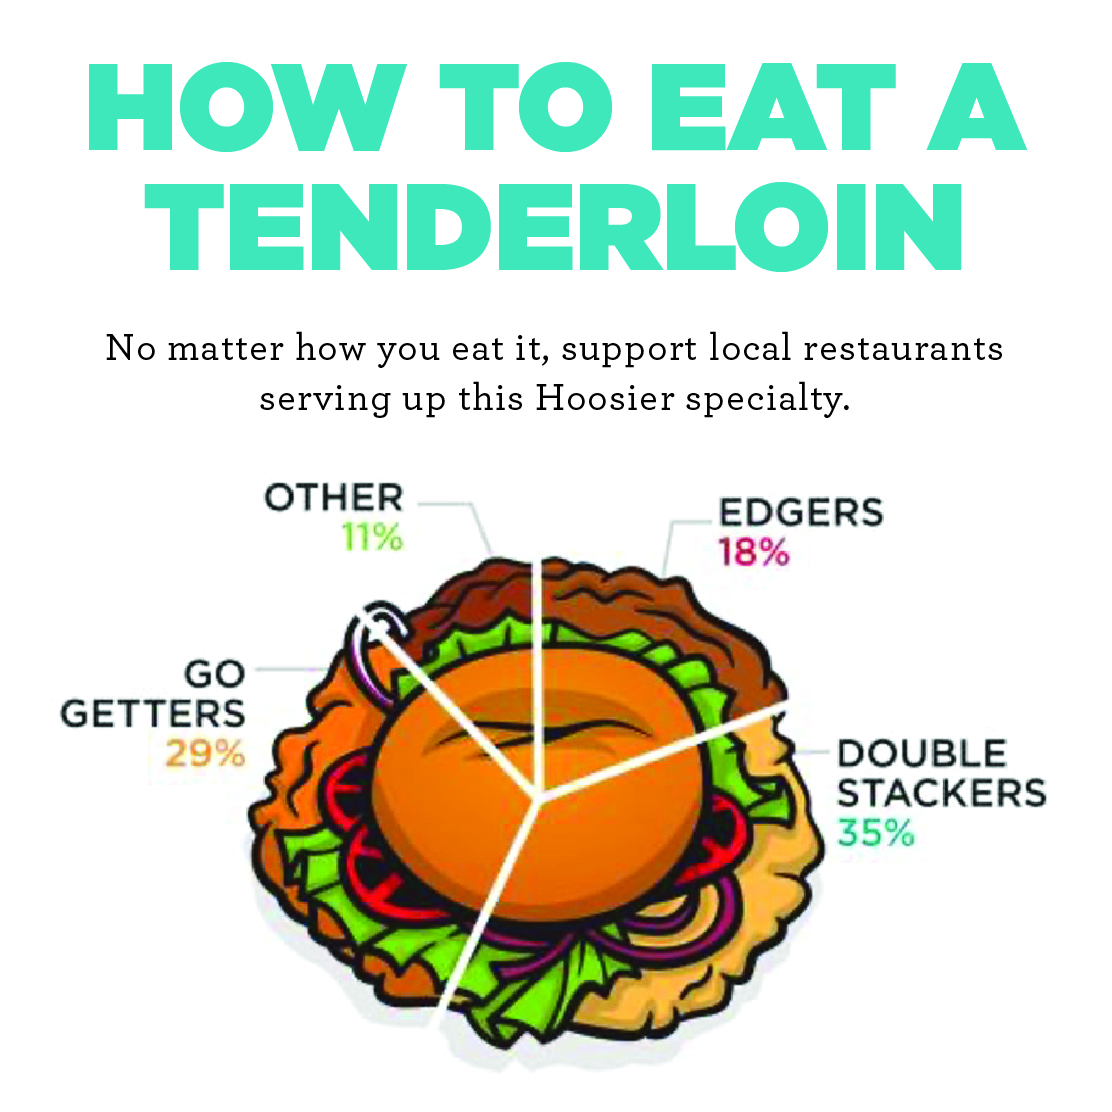 Graphic showing how to eat a tenderloin